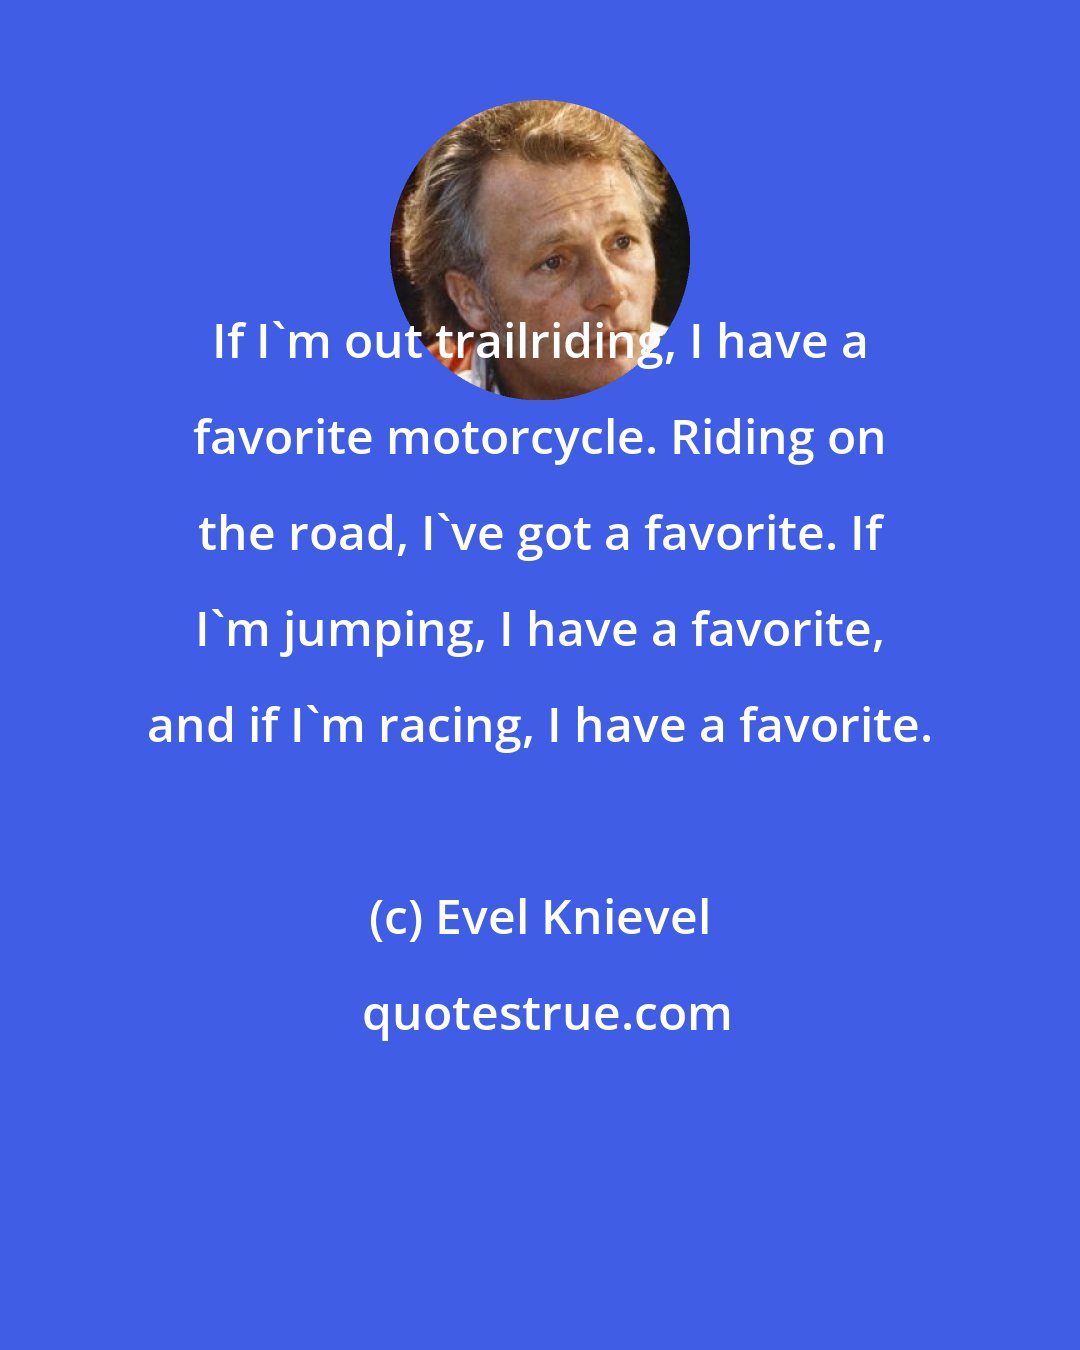 Evel Knievel: If I'm out trailriding, I have a favorite motorcycle. Riding on the road, I've got a favorite. If I'm jumping, I have a favorite, and if I'm racing, I have a favorite.